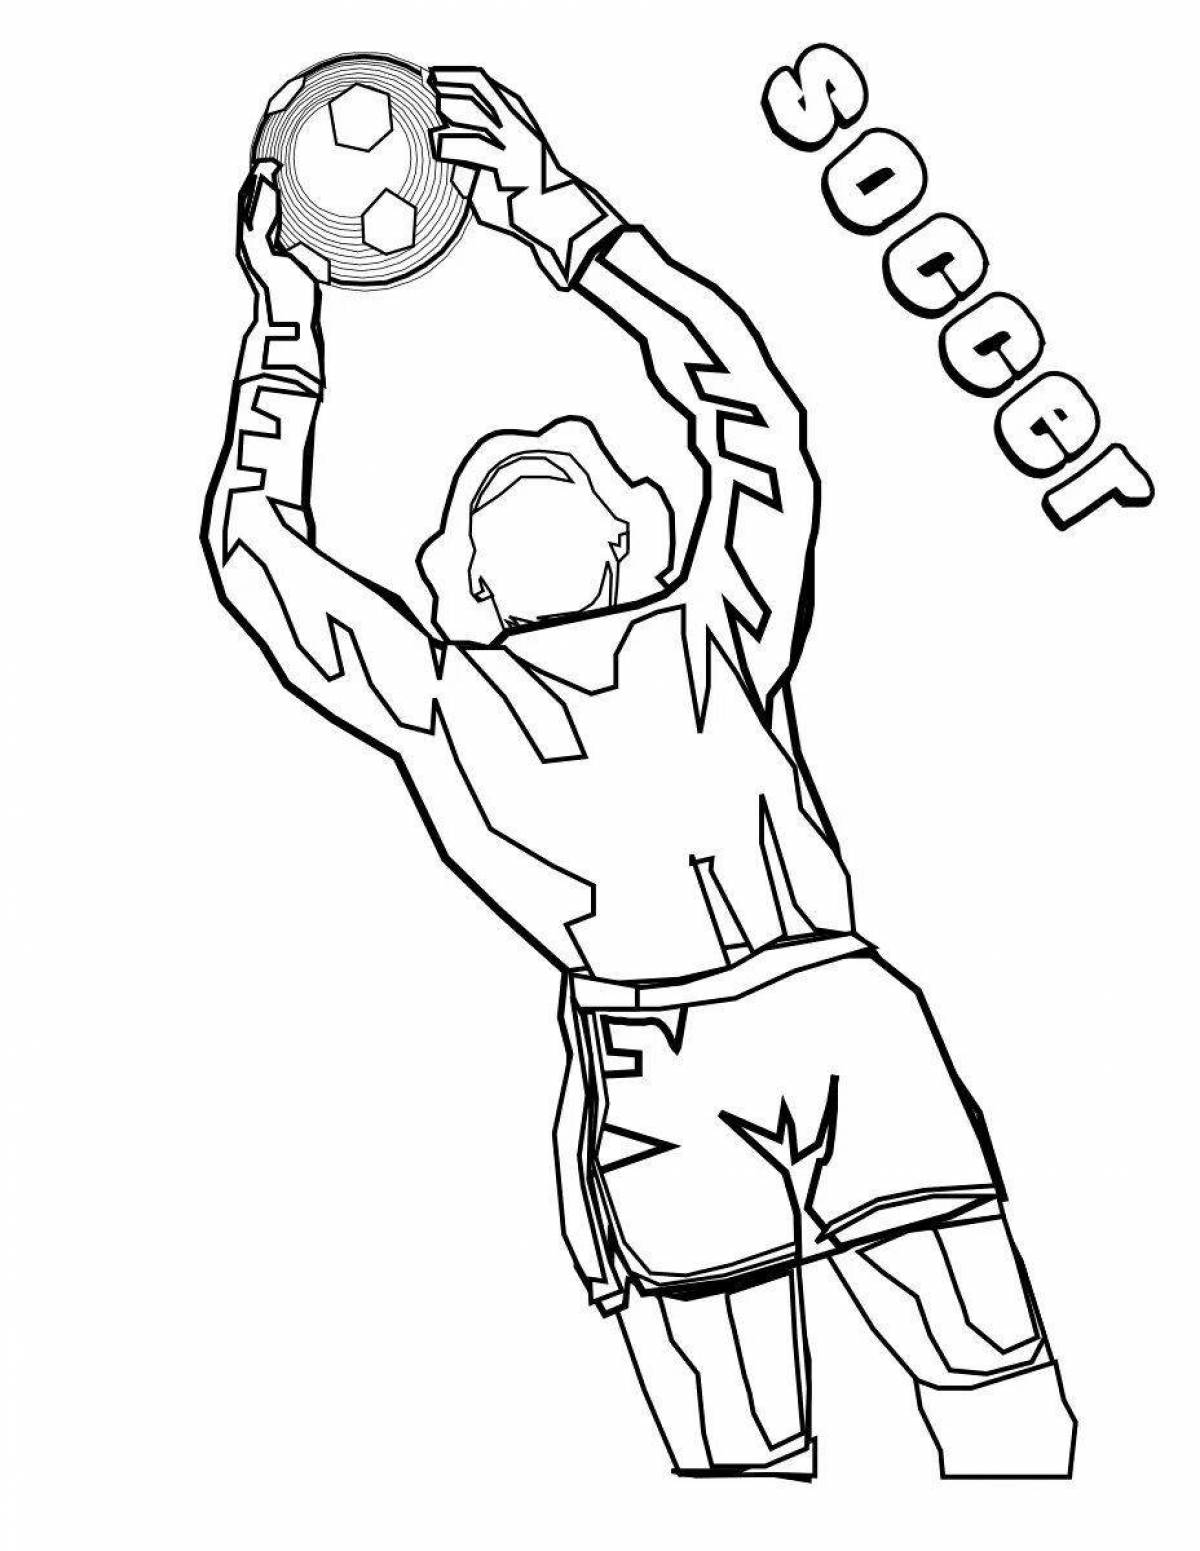 Bright world cup coloring page